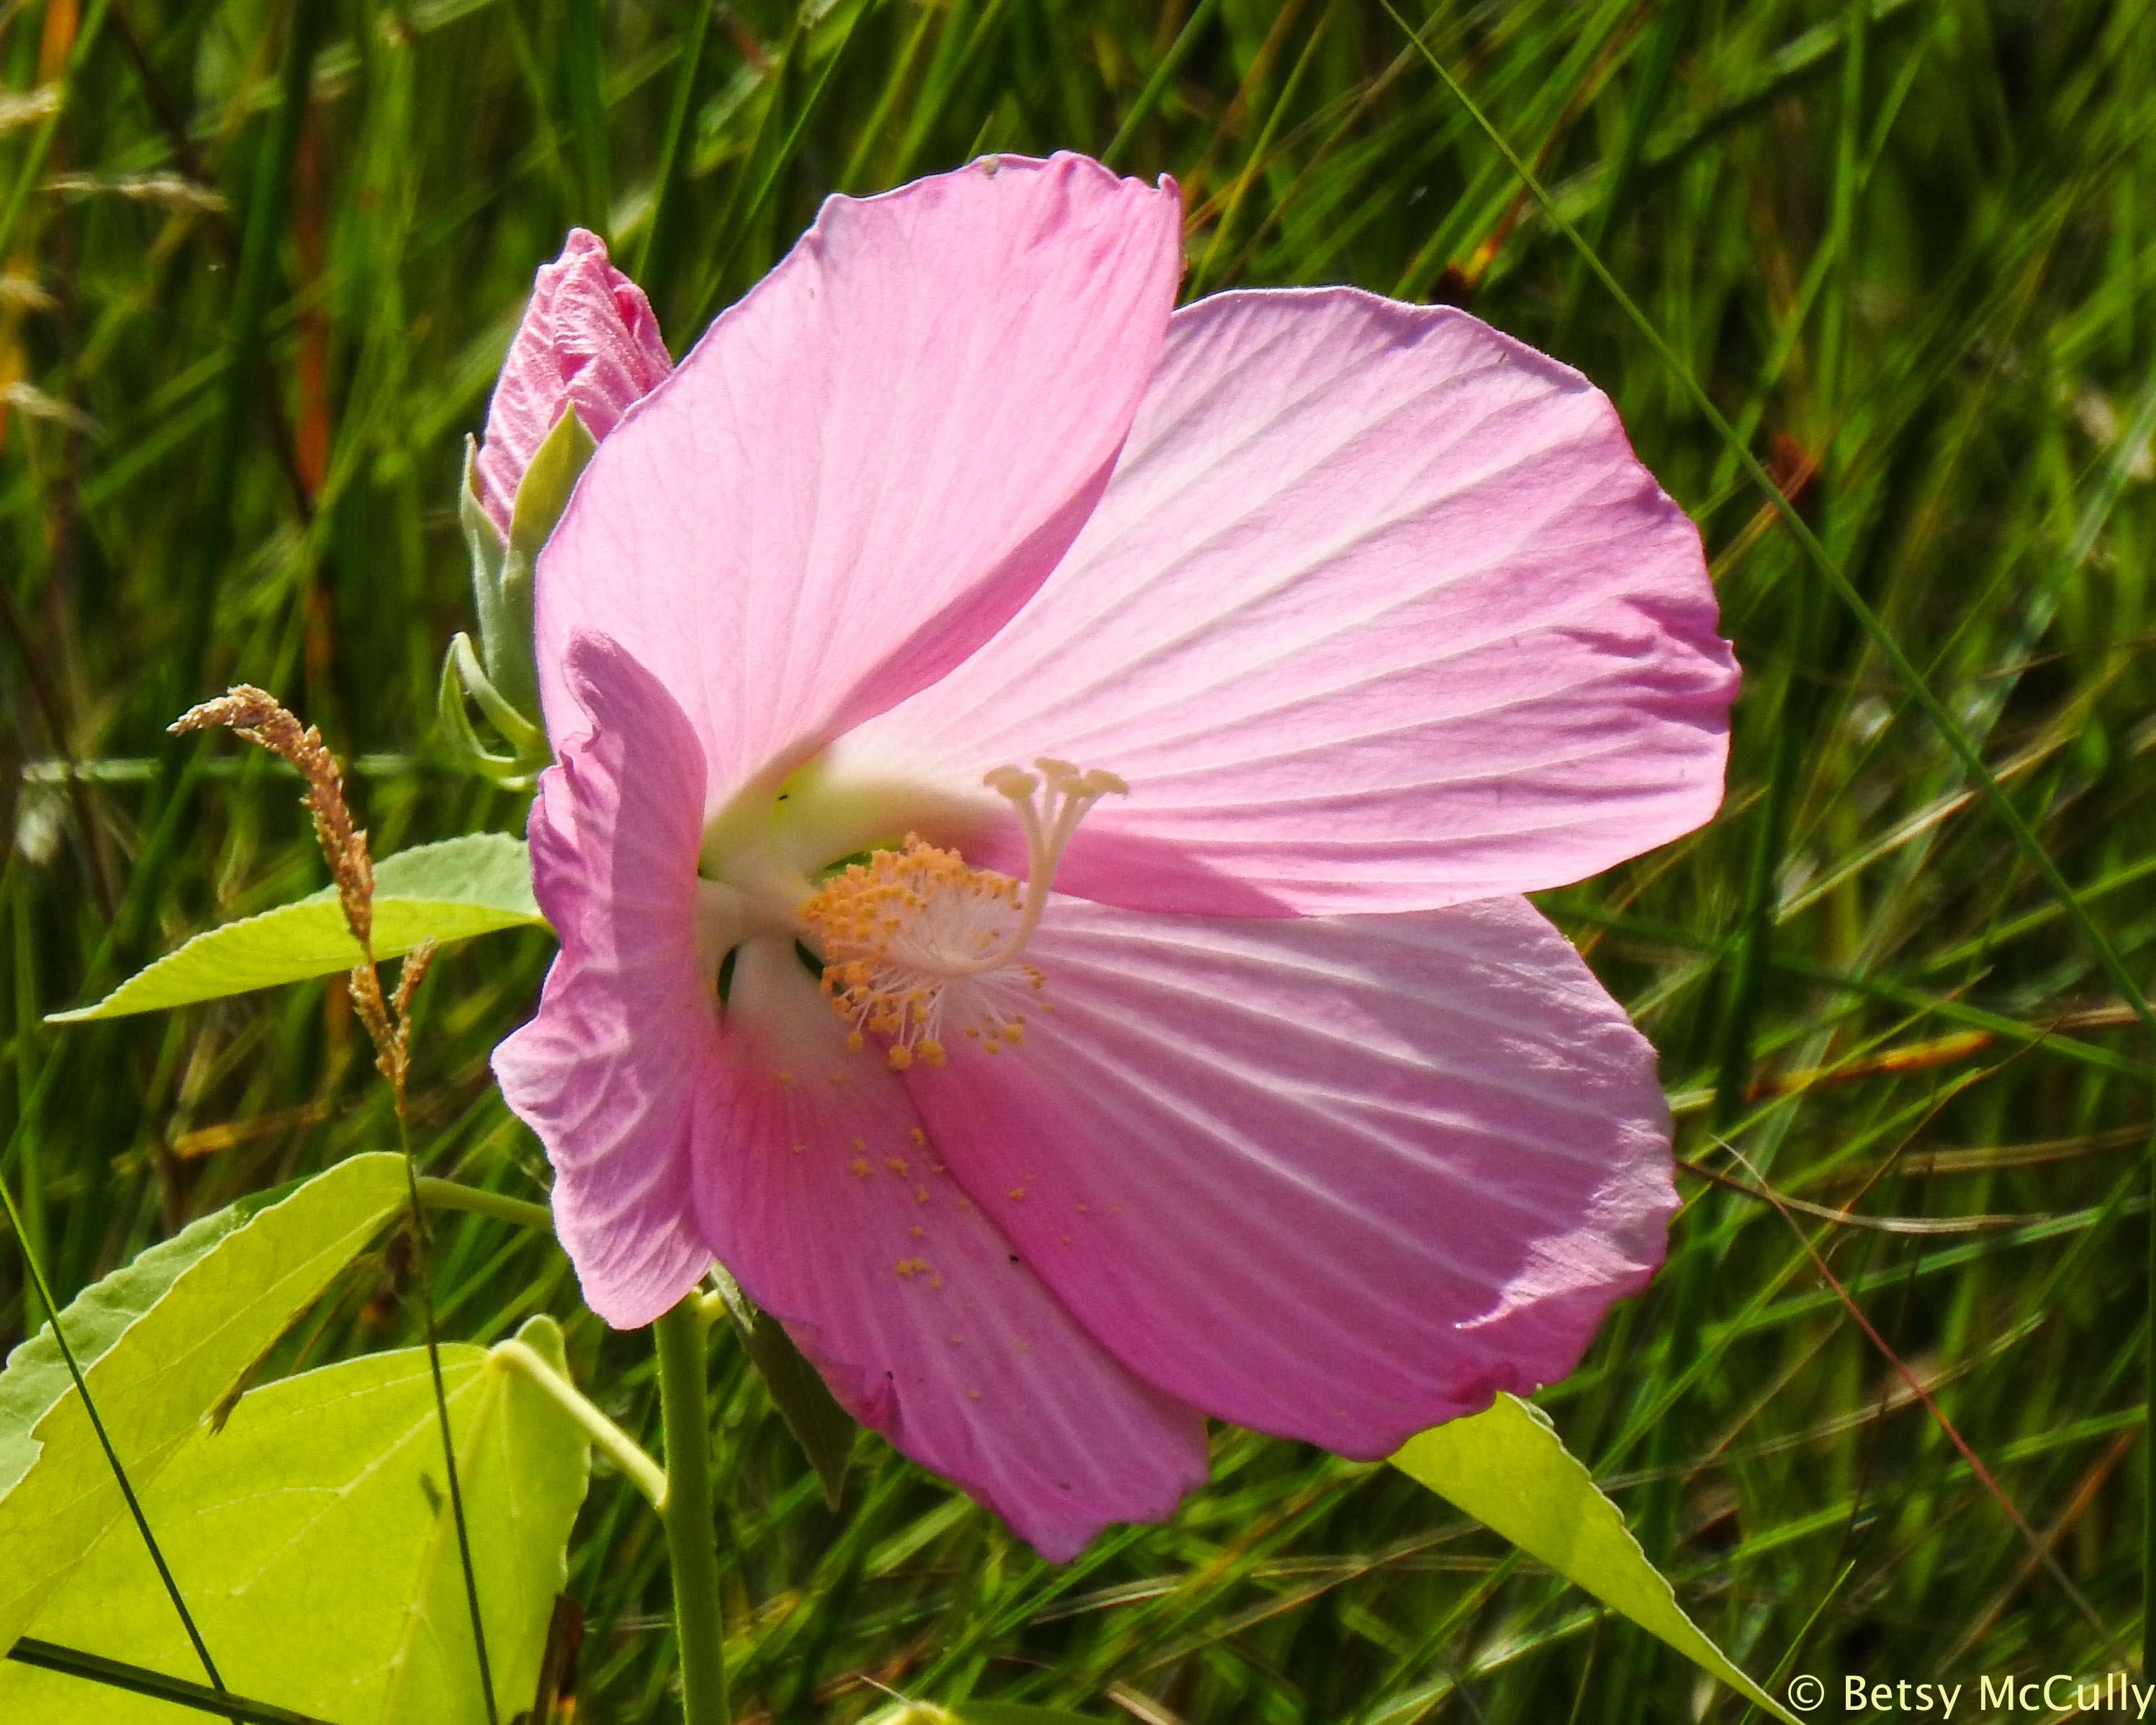 photo of swamp rose-mallow